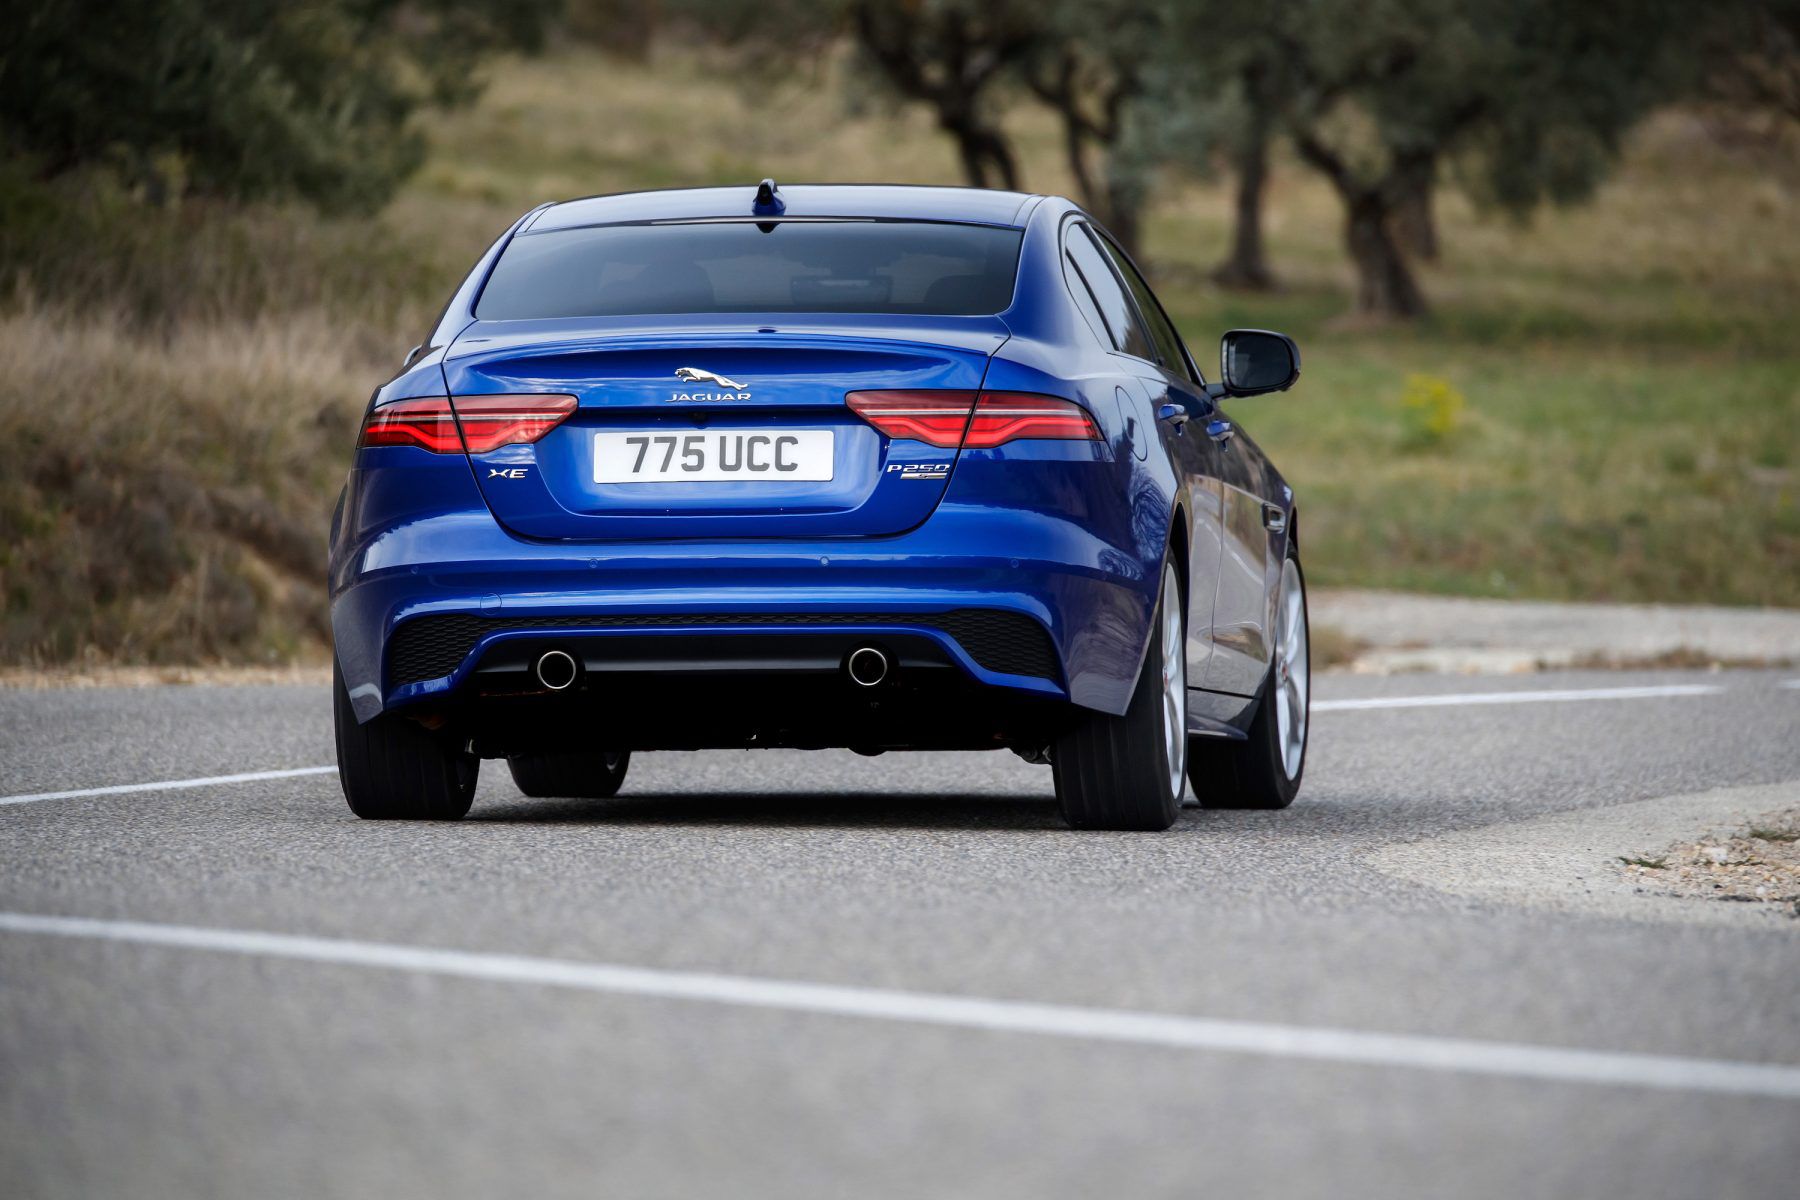 close up of the rear of the Jaguar XE